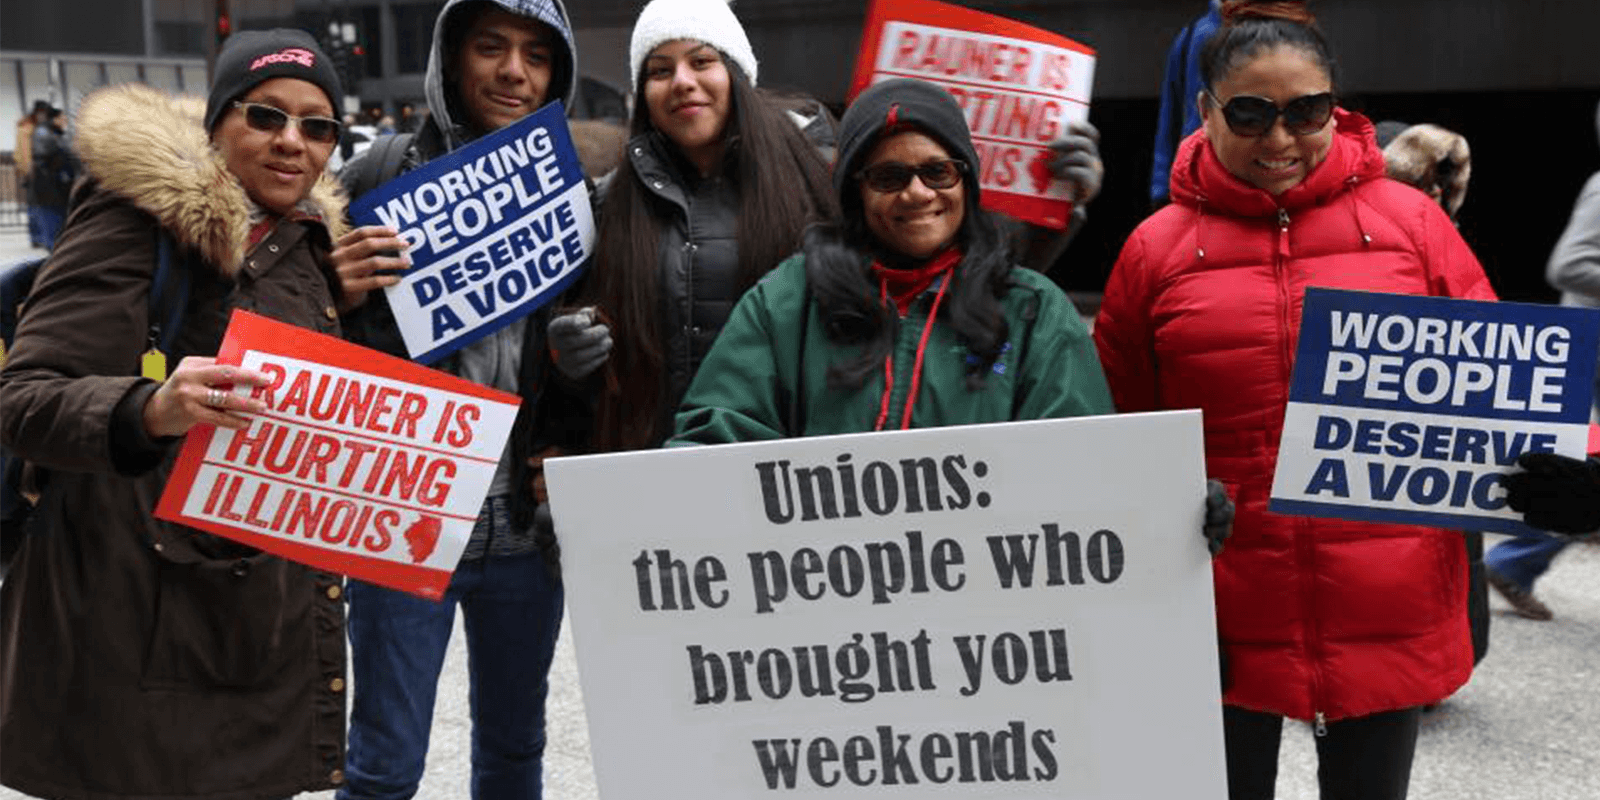 ‘We Wouldn’t Have Anything If It Weren’t for Our Union’